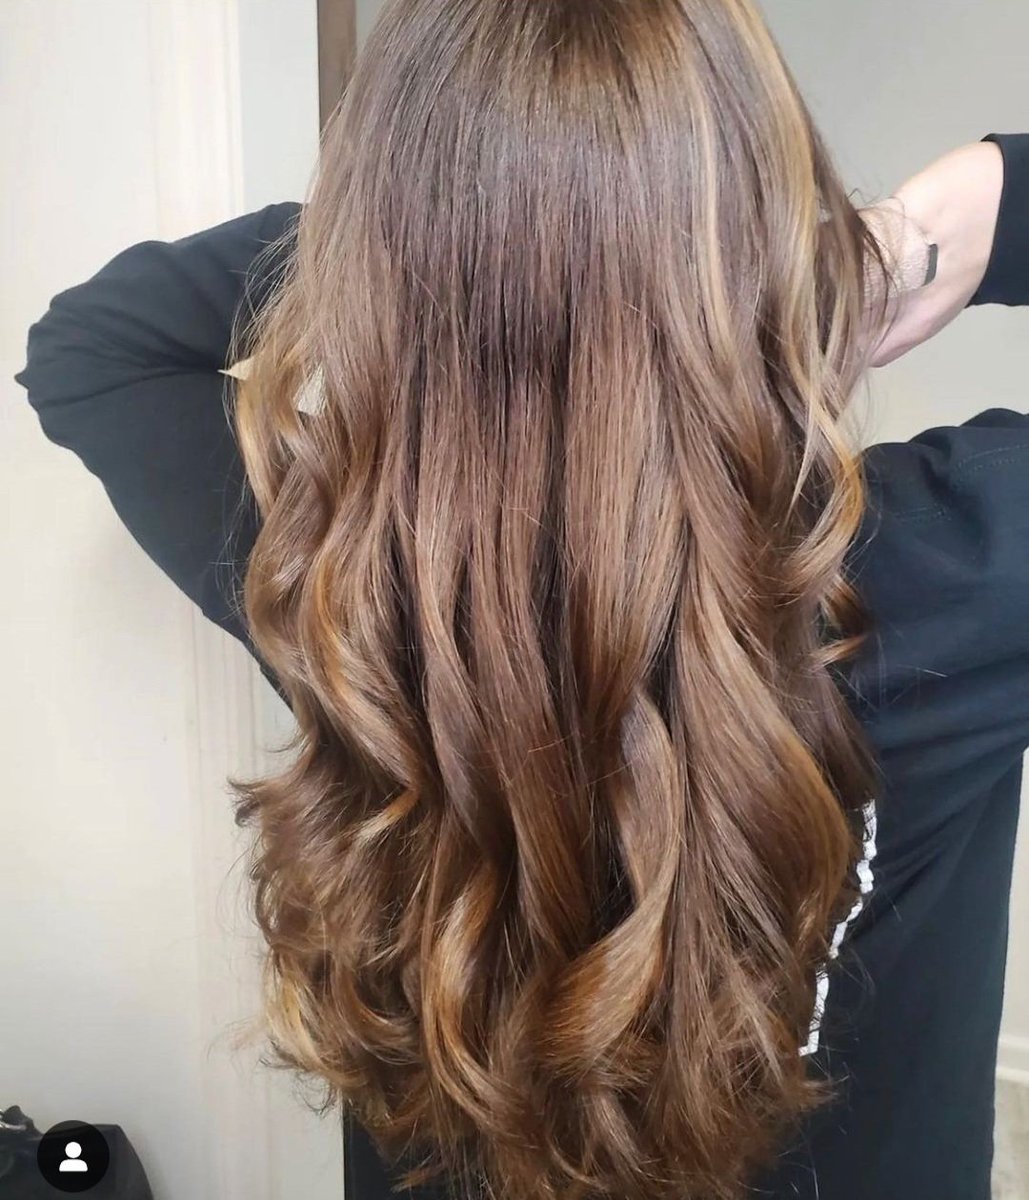 'Bringing out the natural brightness with hand-painted balayage! ✨ #NaturalBalayage #HairTransformation #BrunetteBeauty